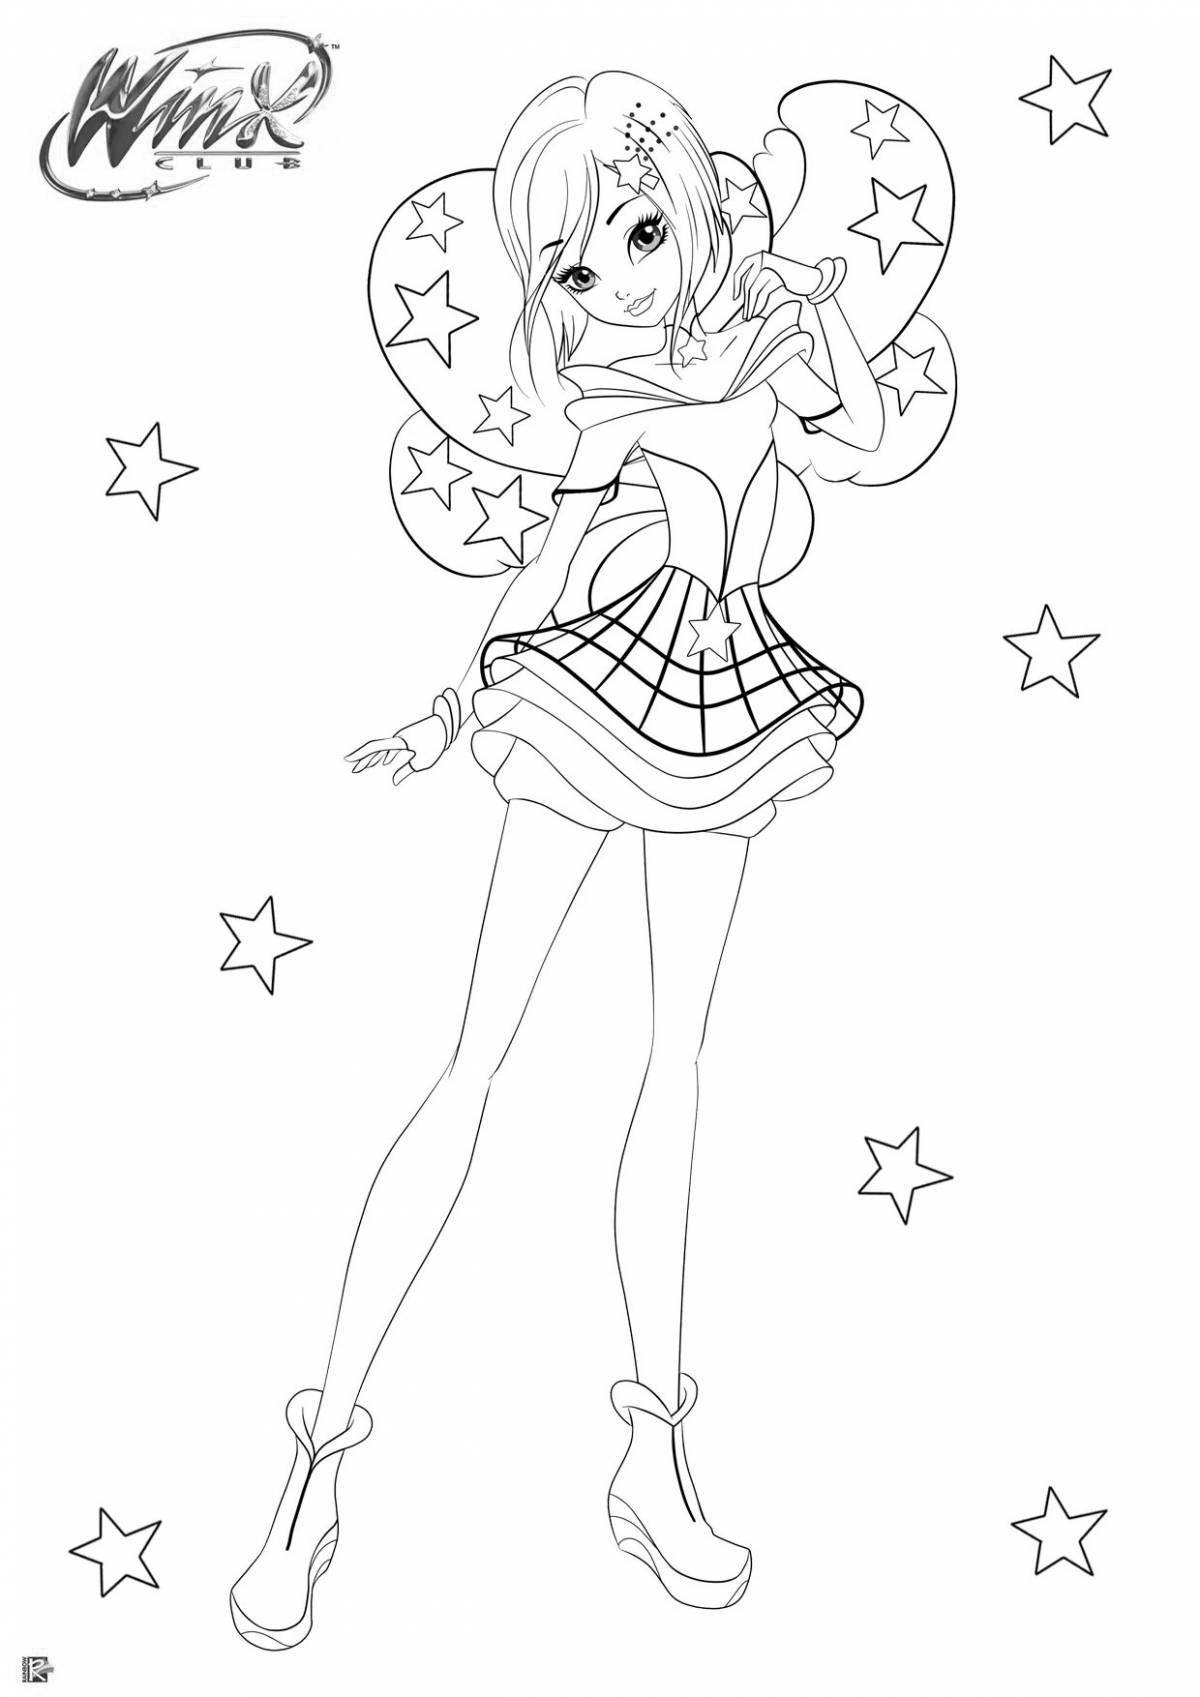 Colorful winx comics coloring page